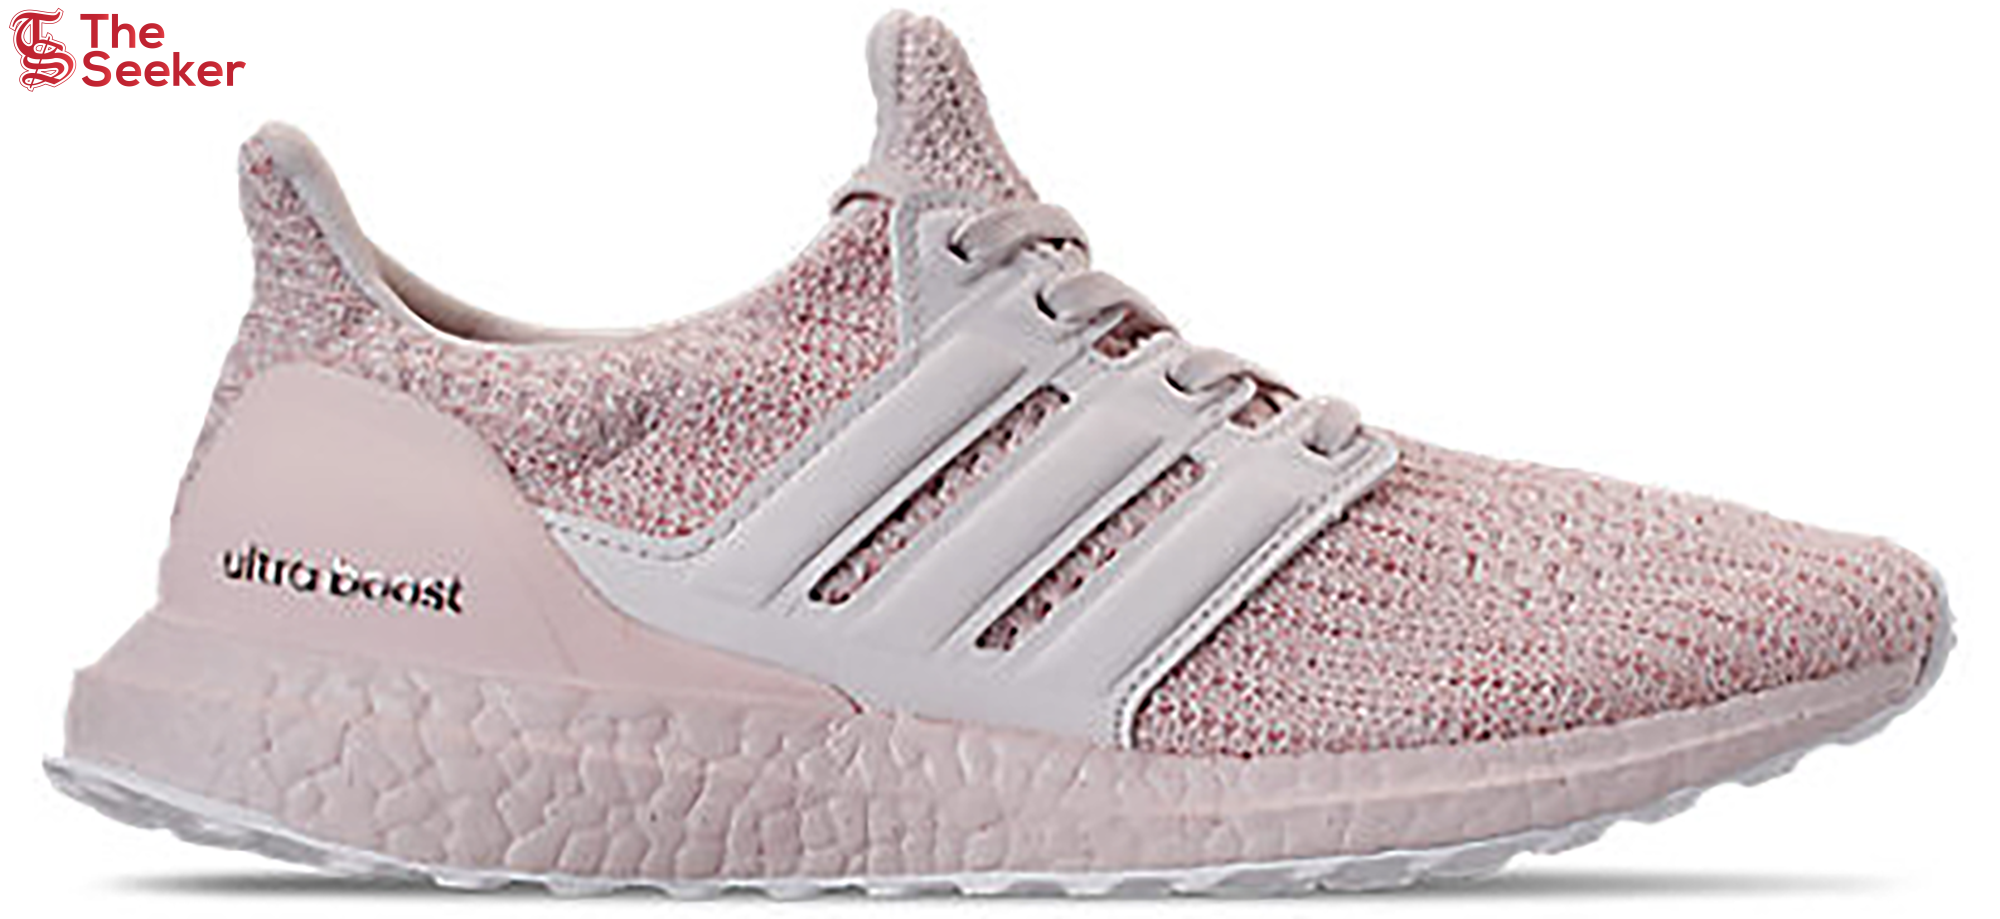 adidas Ultra Boost Orchid Tint (Women's)